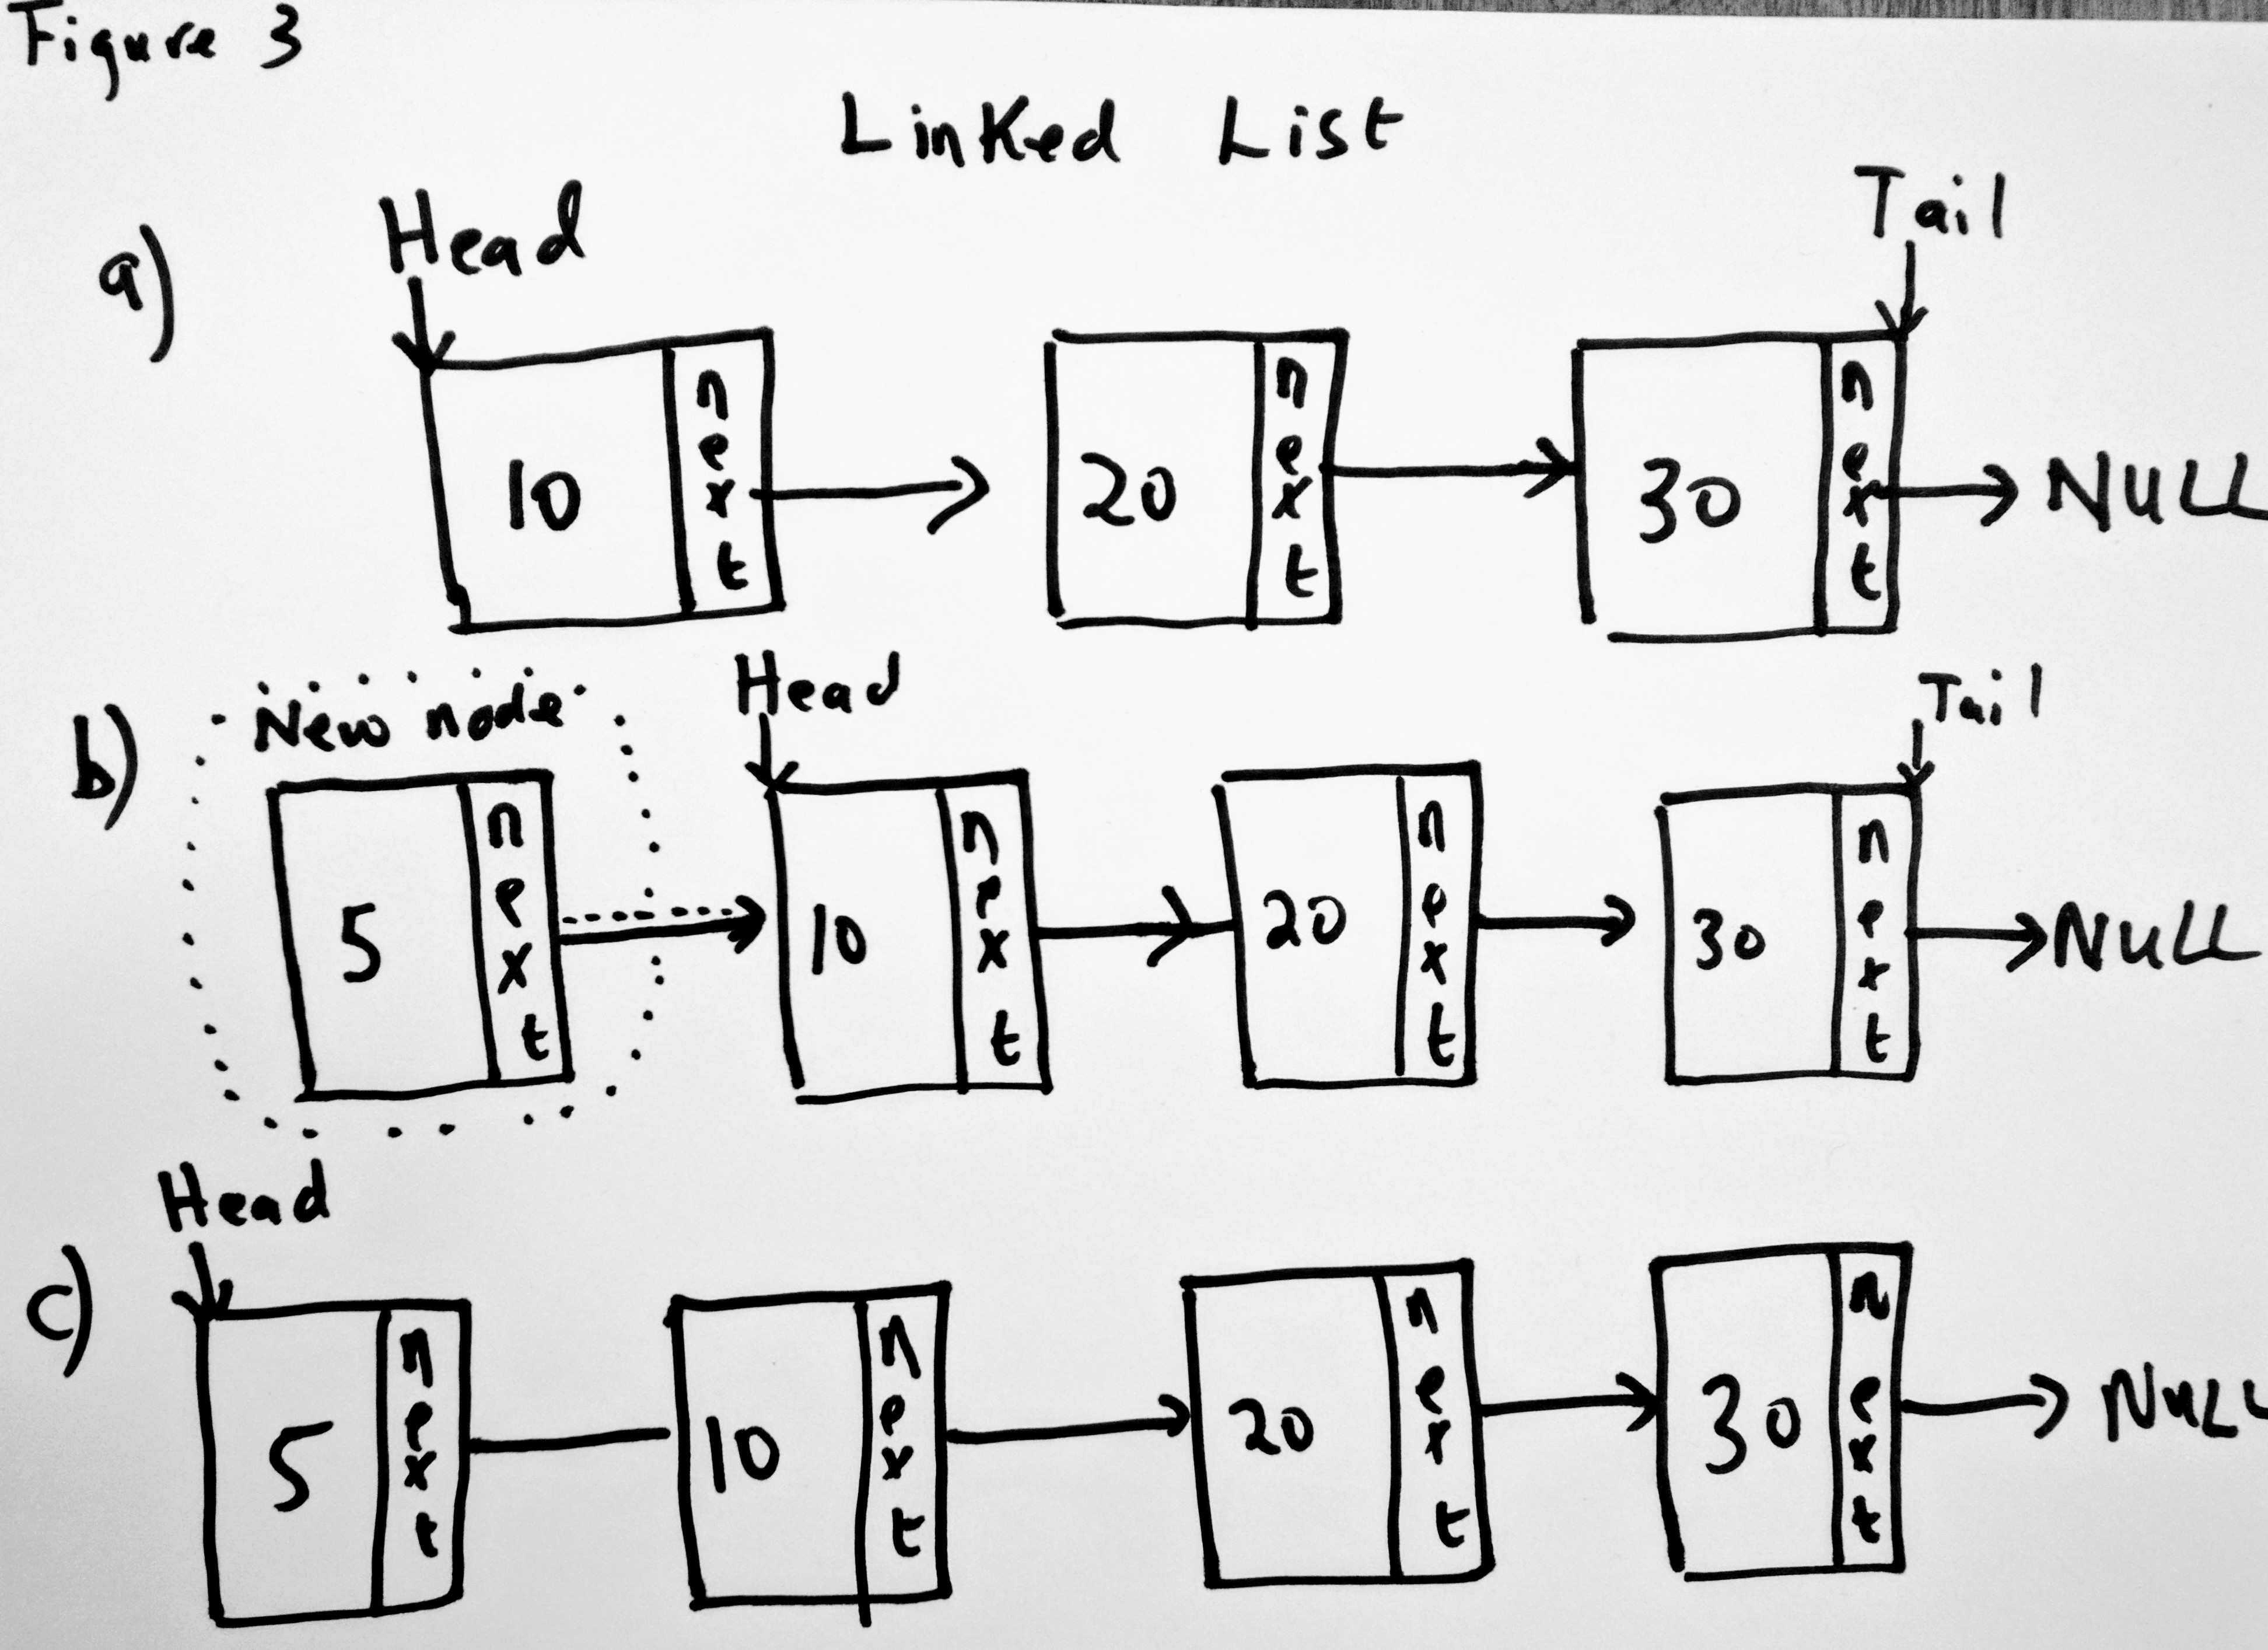 Heading to Head of Linked List